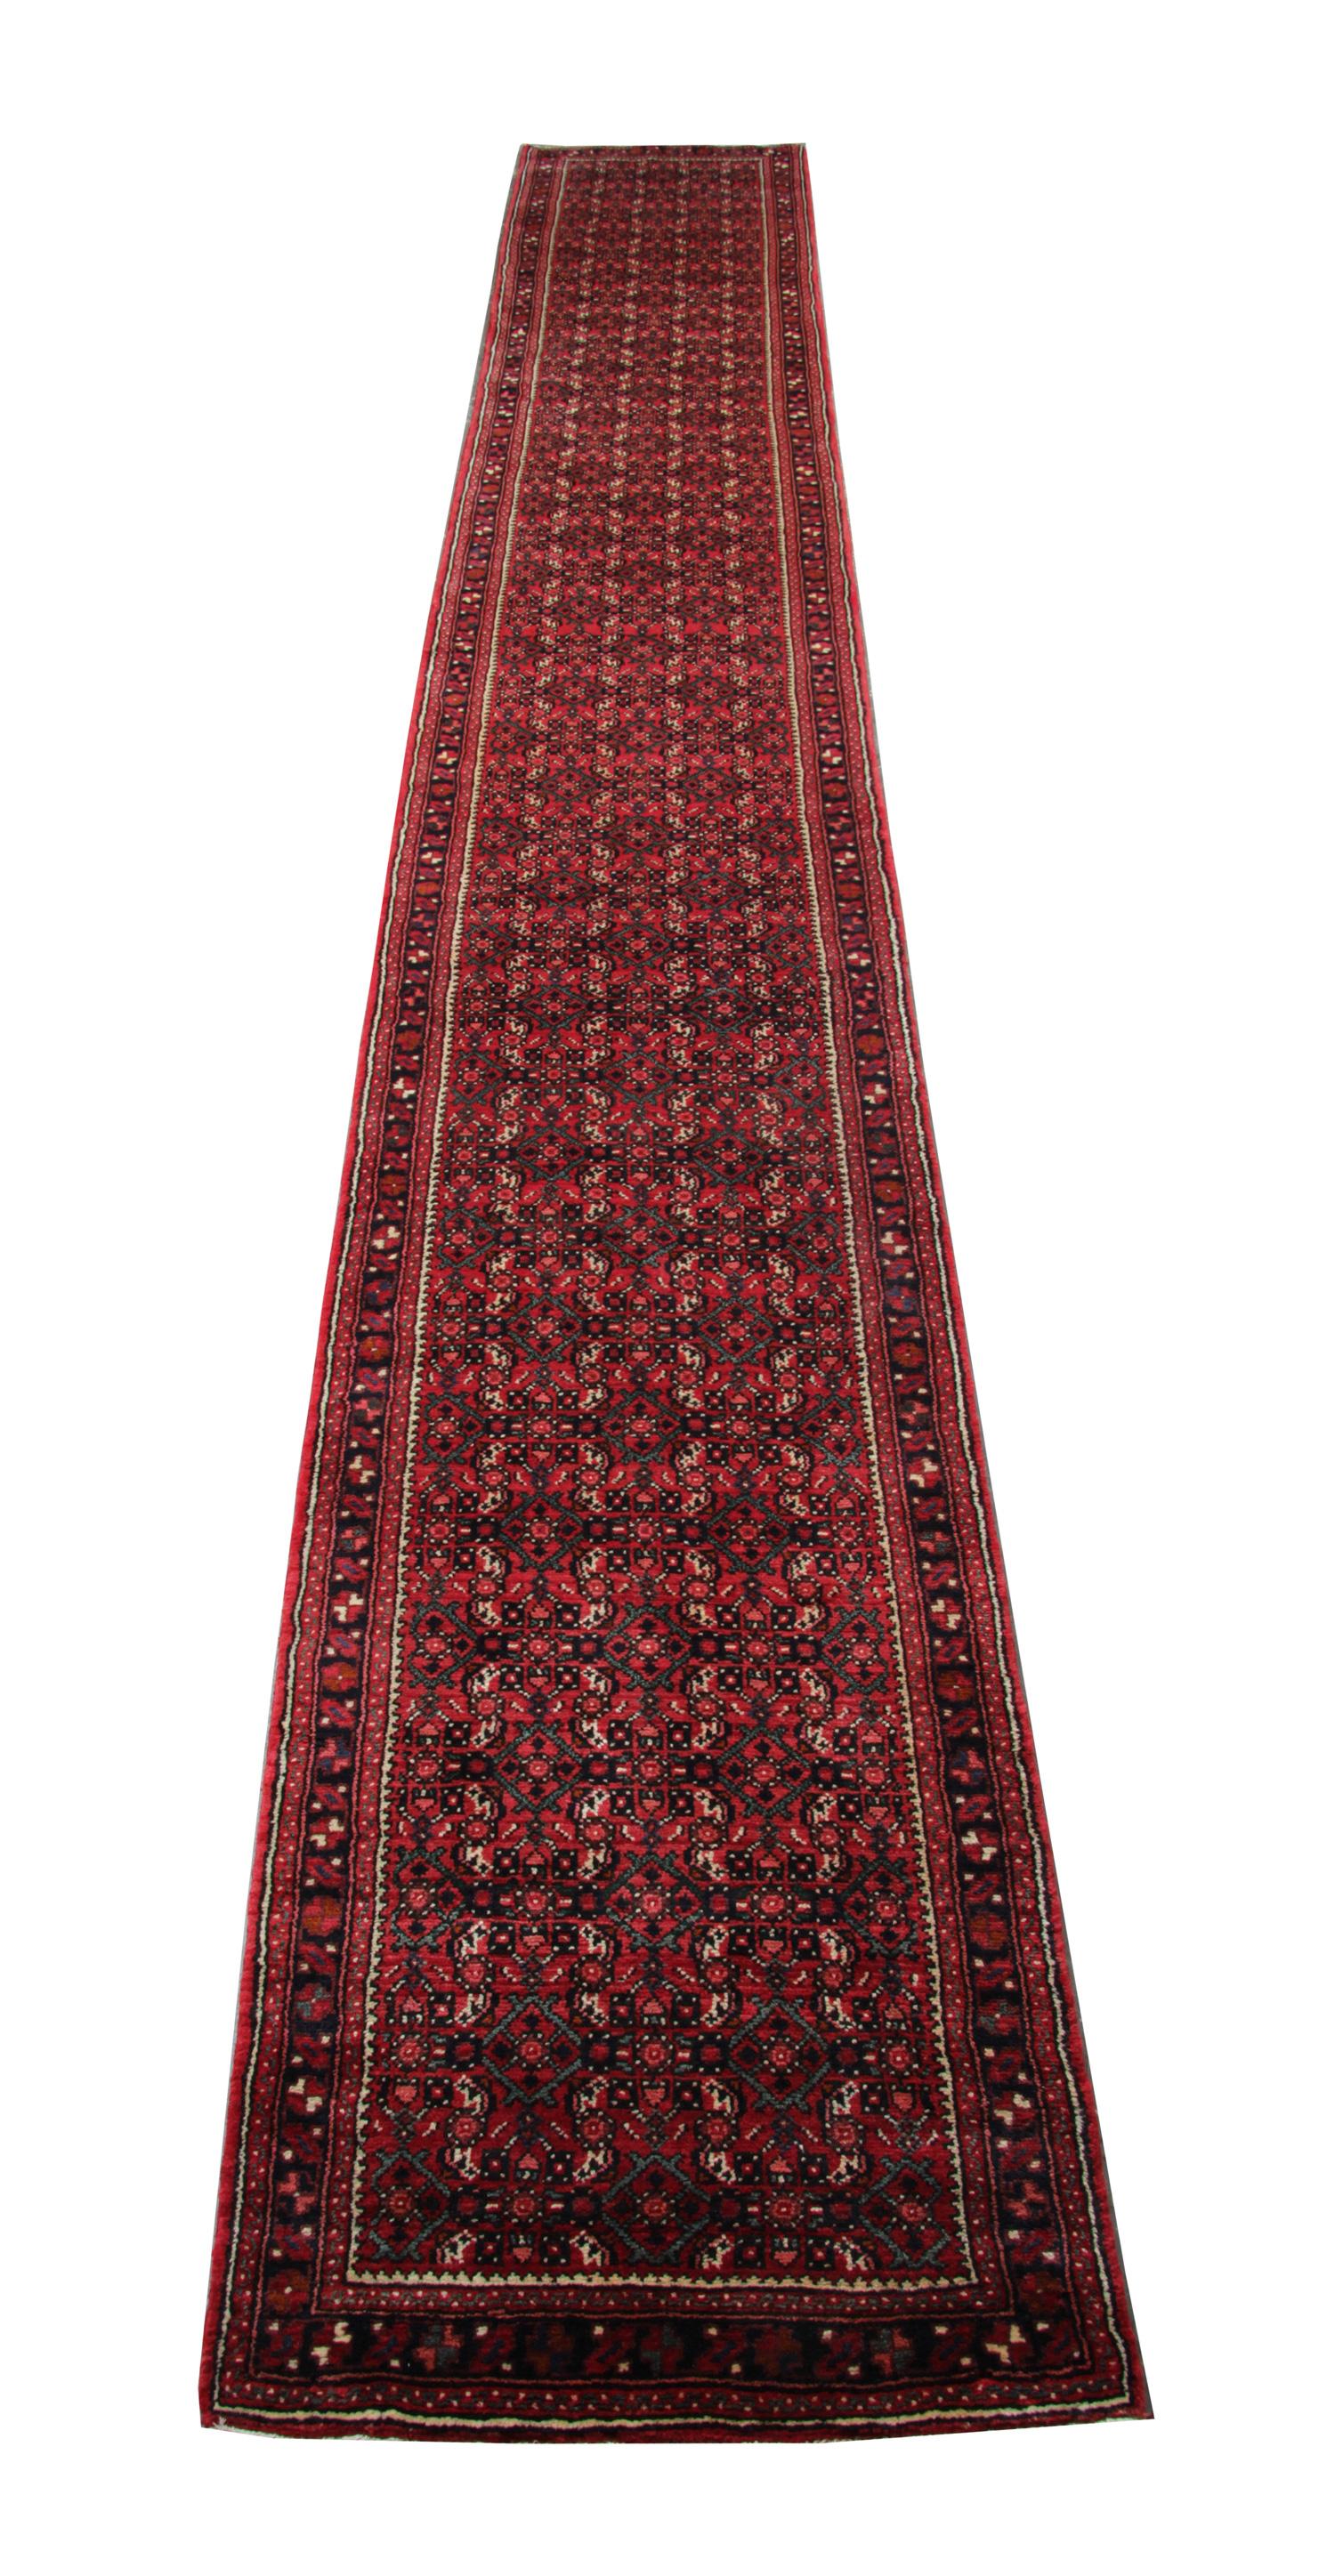 This elegant hand made wool runner rug was constructed in 1960. The fine central design features a rich red background with brown, cream and black accents that make up the sophisticated repeat geometric pattern. Woven with elegance, this piece is